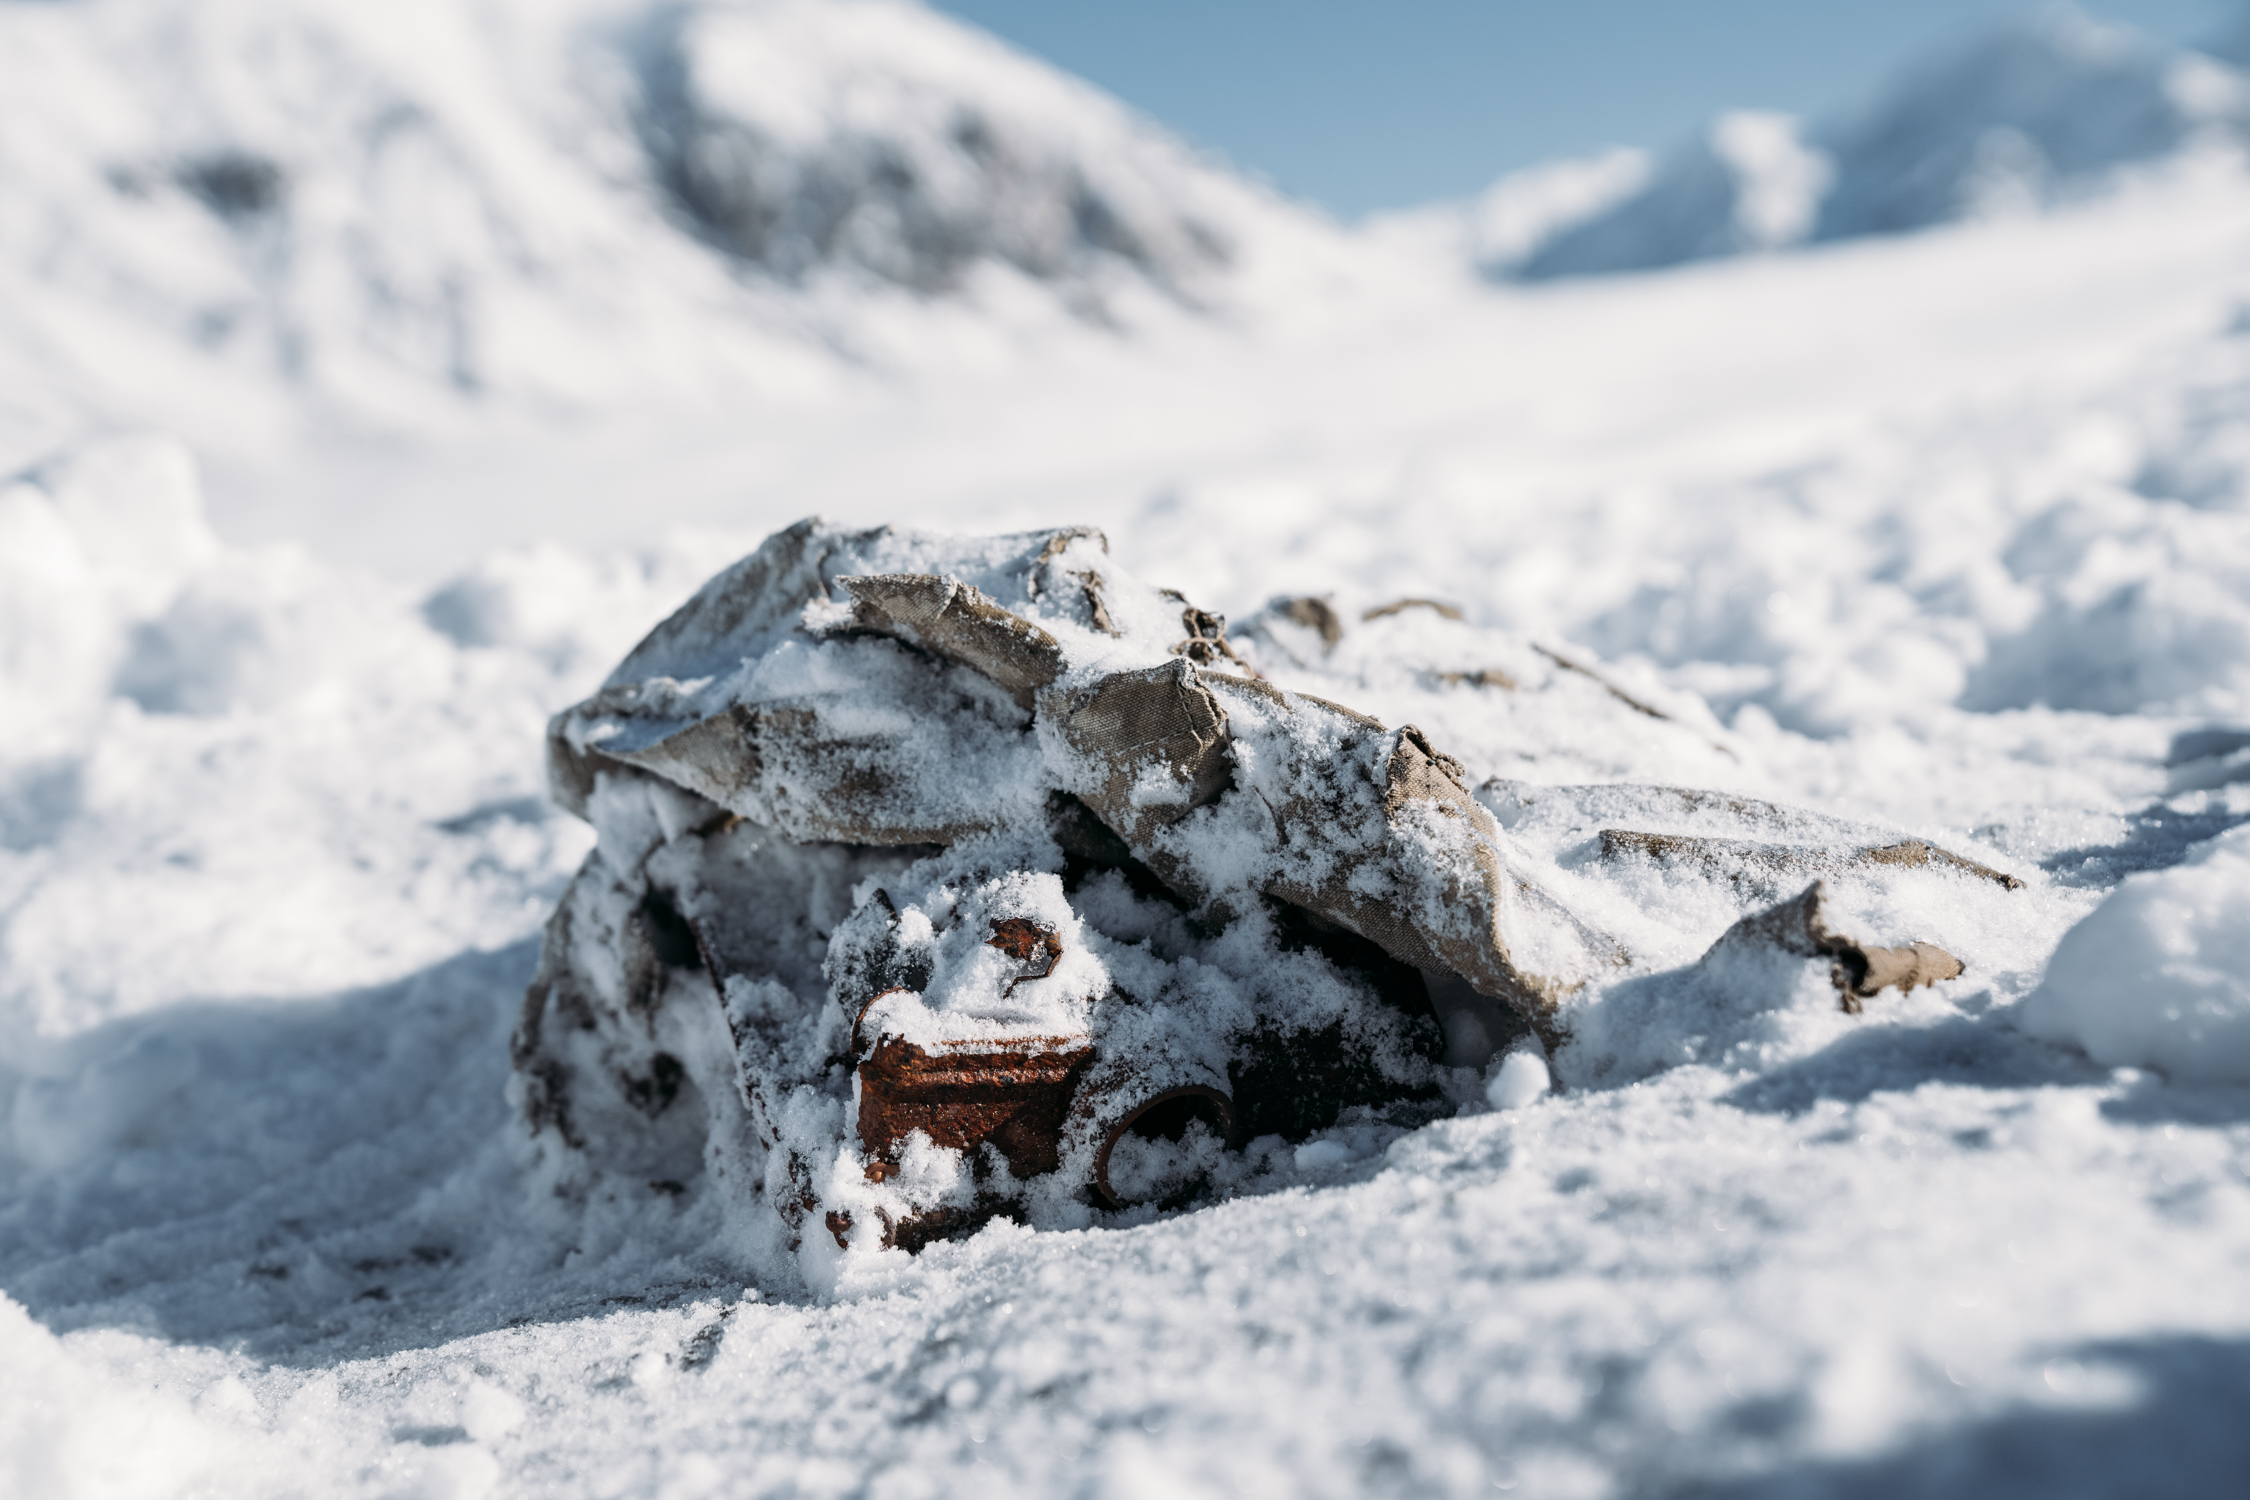 PHOTO: Bradford Washburn's camera from a 1937 expedition discovered on Walsh Glacier.